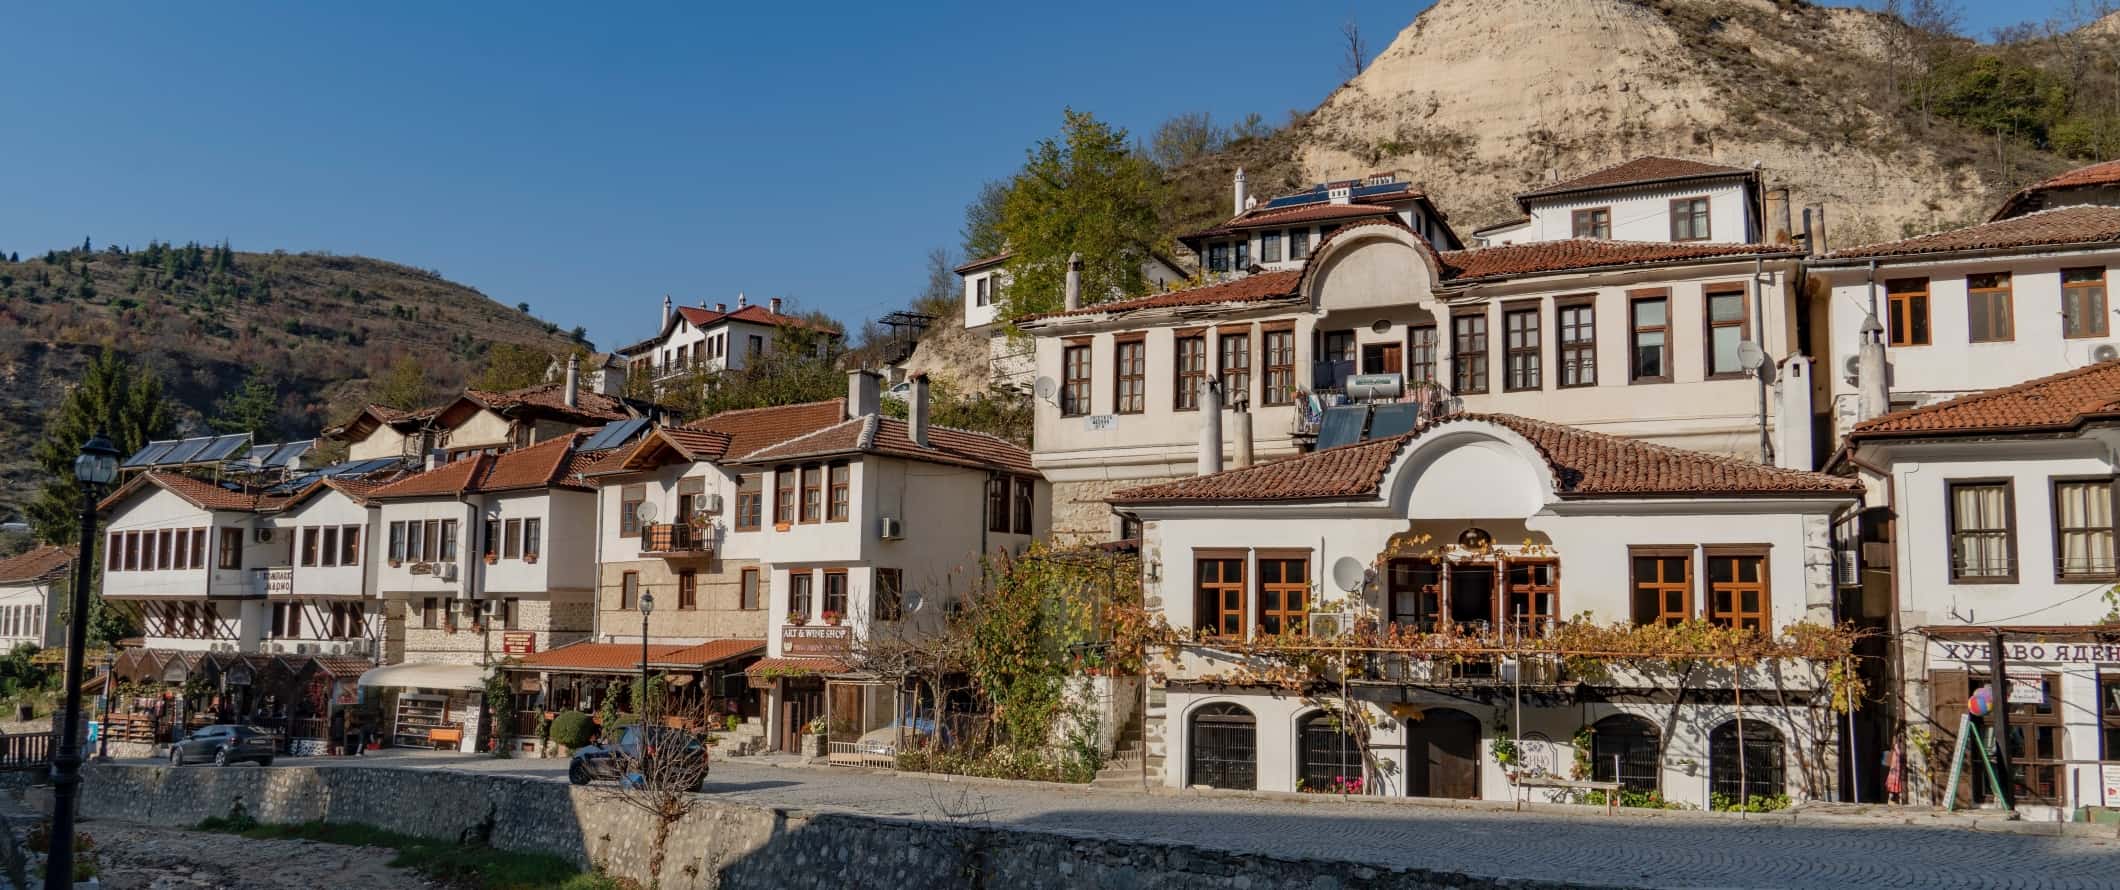 Traditional Bulgarian houses with terracotta roofs along a cobblestone street in a small village